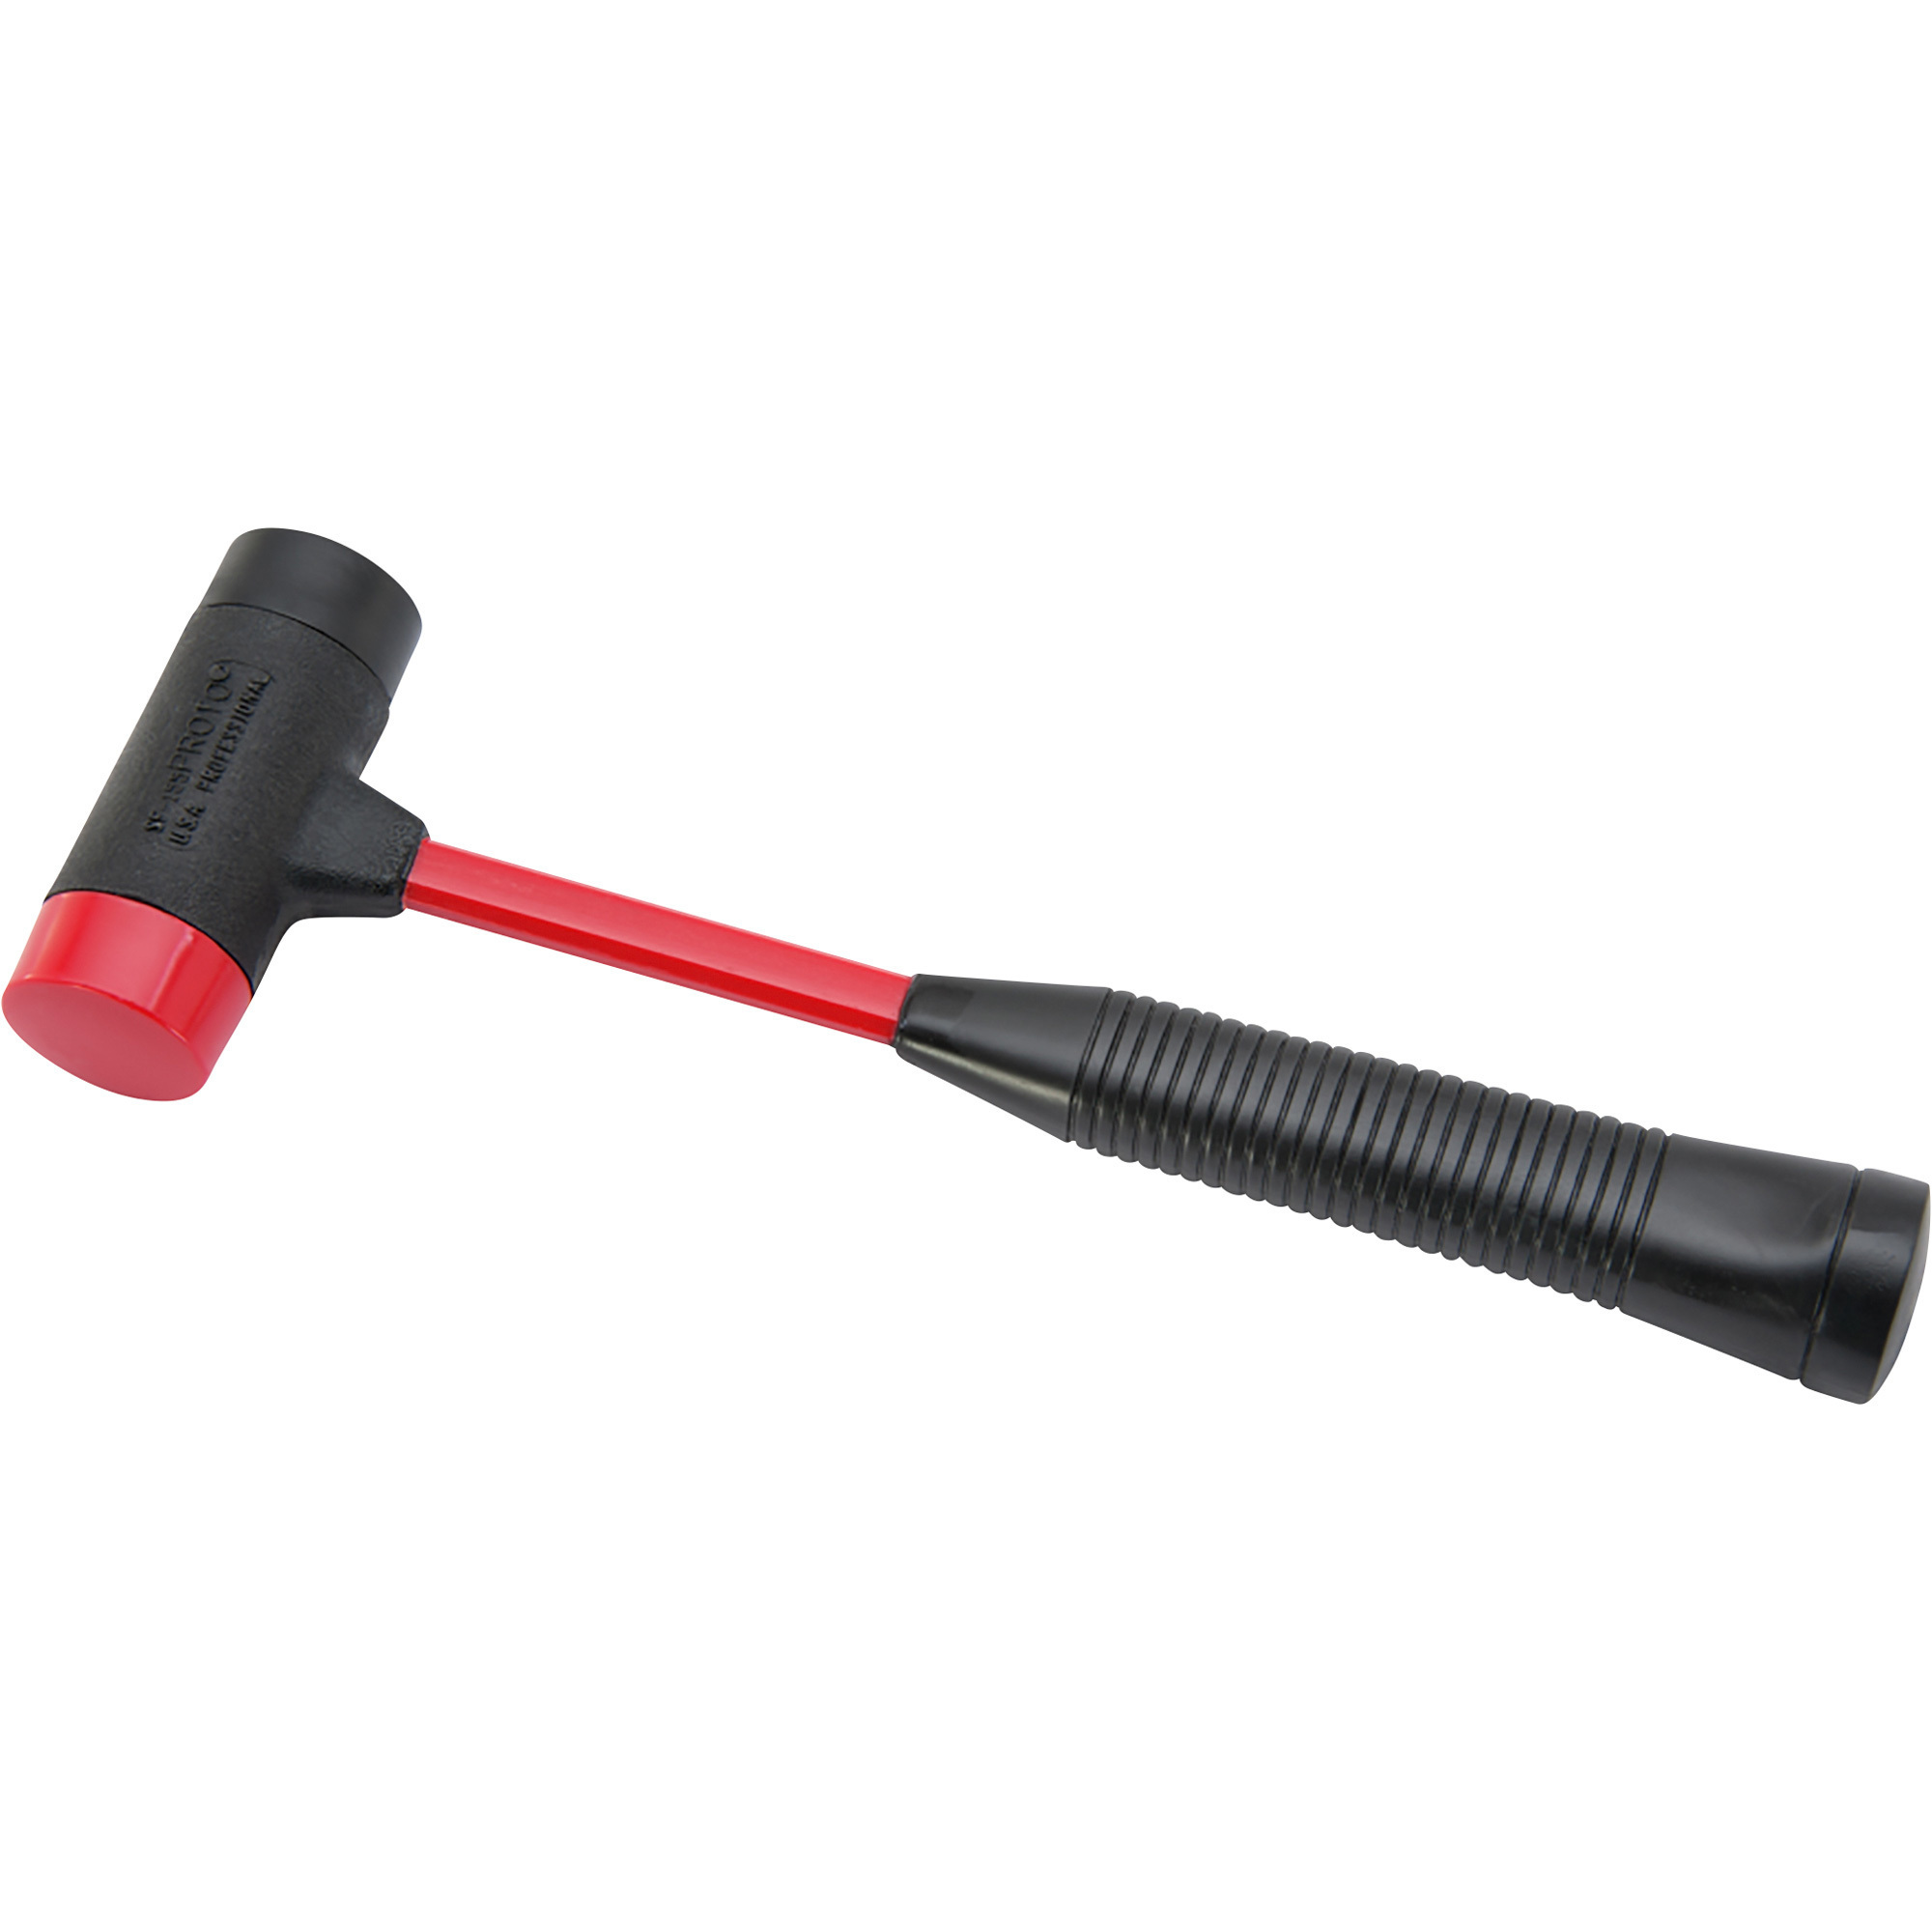 Proto 15Inch Double-Face Hammer, Medium and Hard Tips, Model JSF200HM